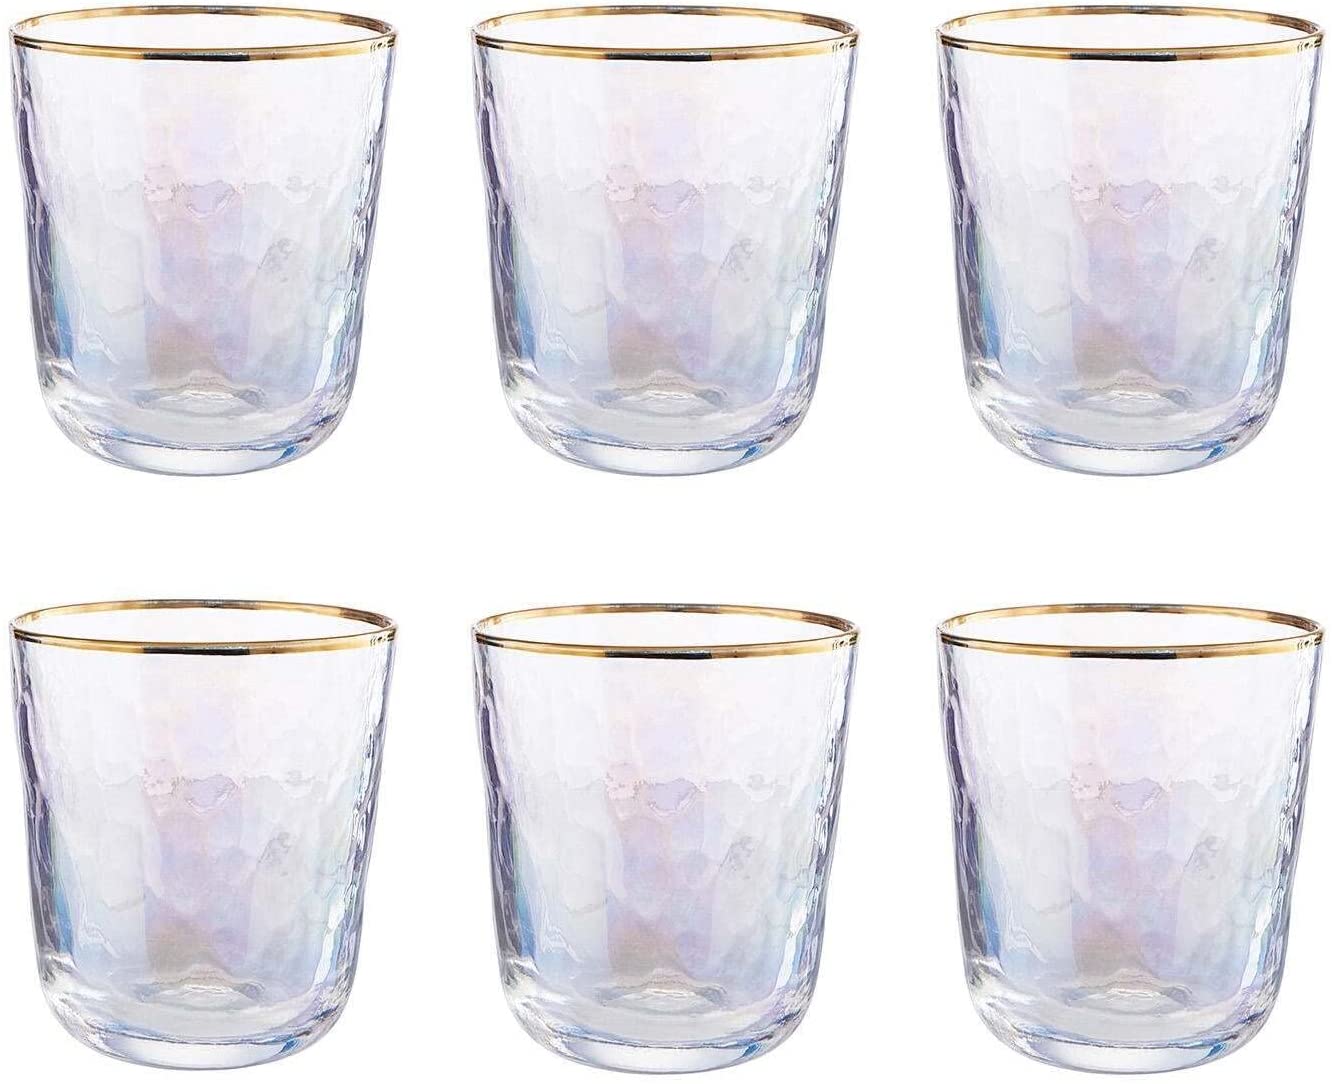 BUTLERS Smeralda Set of 6 Drinking Glasses with Gold Edge 280 ml - Water Glass in Mother of Pearl - Glass, Juice Glass with Holographic Effect